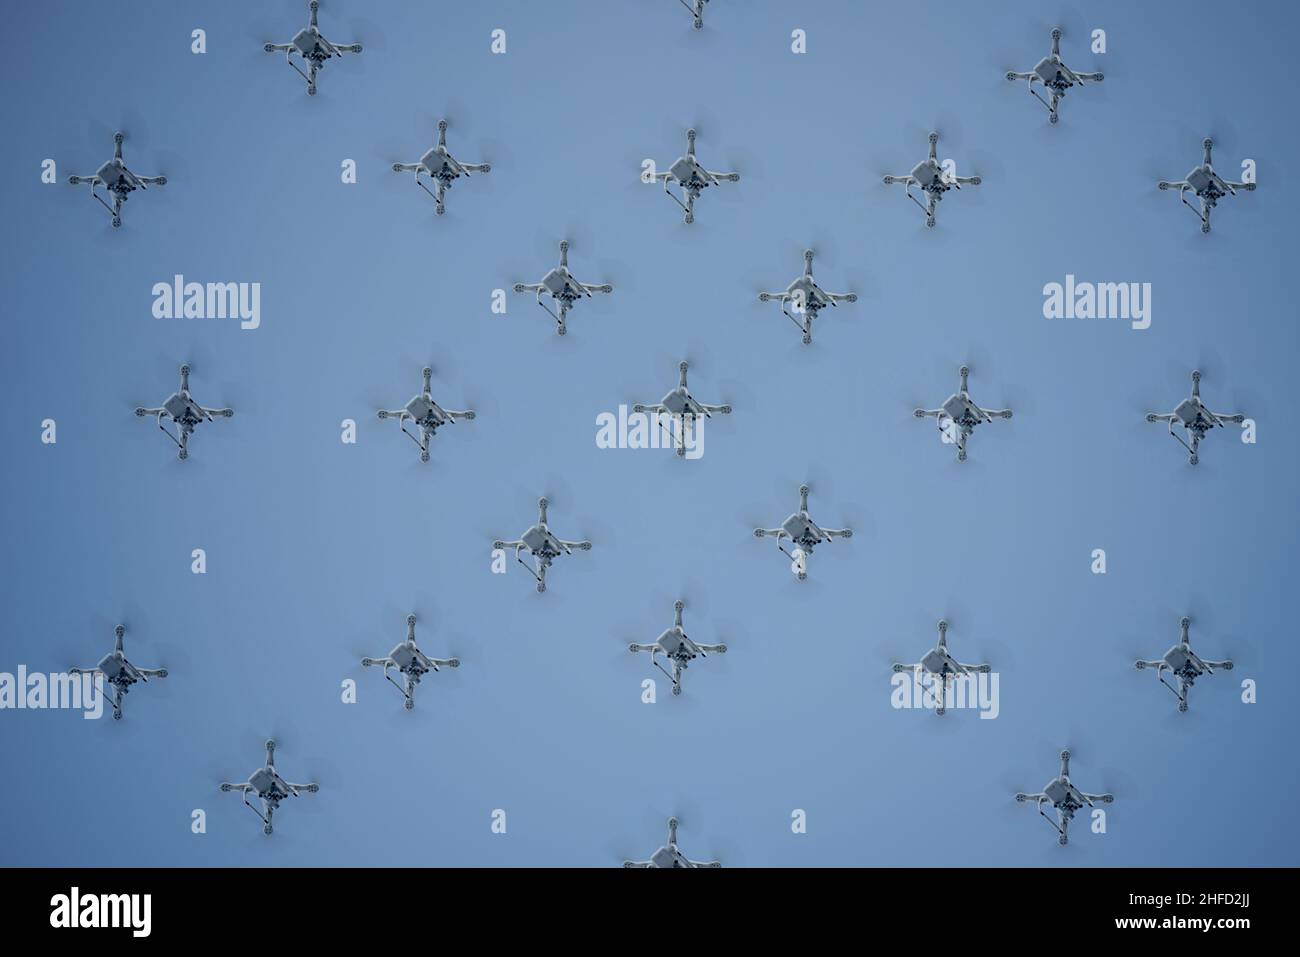 synchronized drones in formation in the air Stock Photo